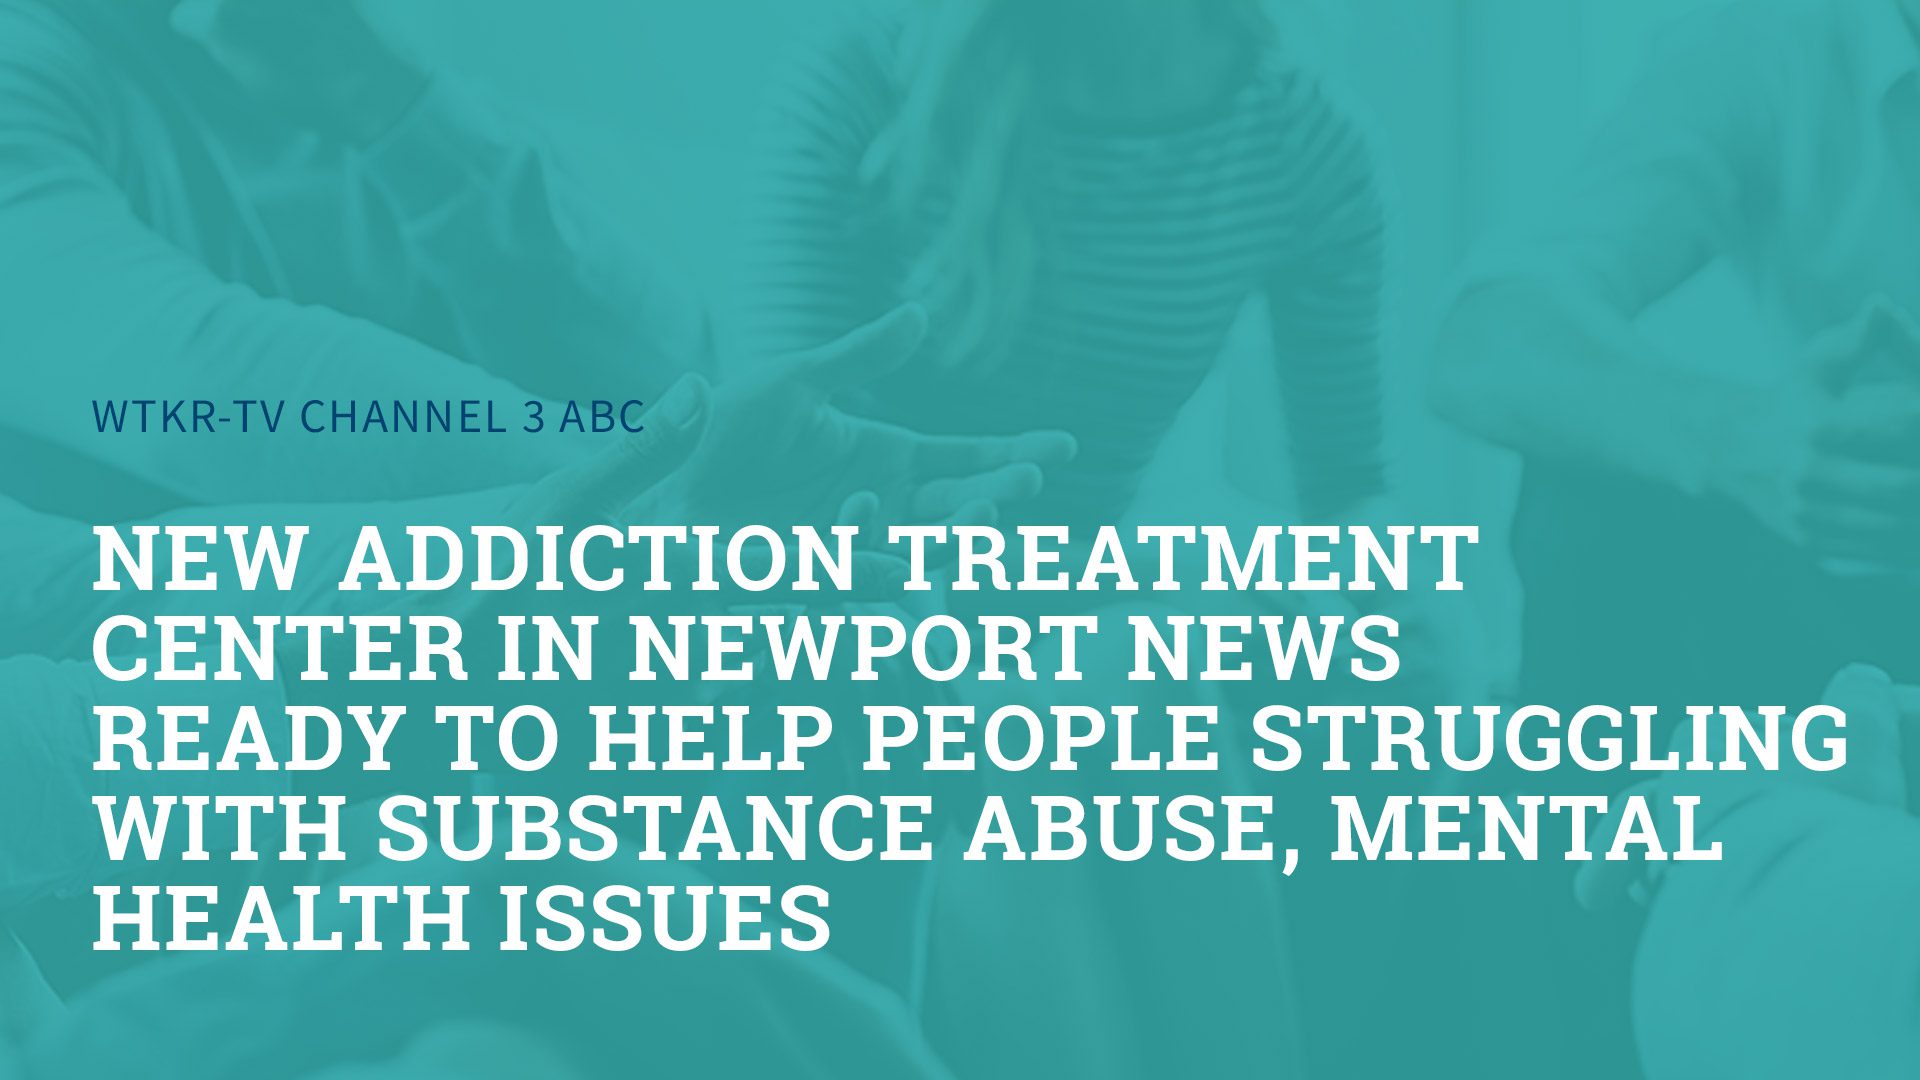 New addiction treatment center in Newport News ready to help people struggling with substance abuse, mental health issues